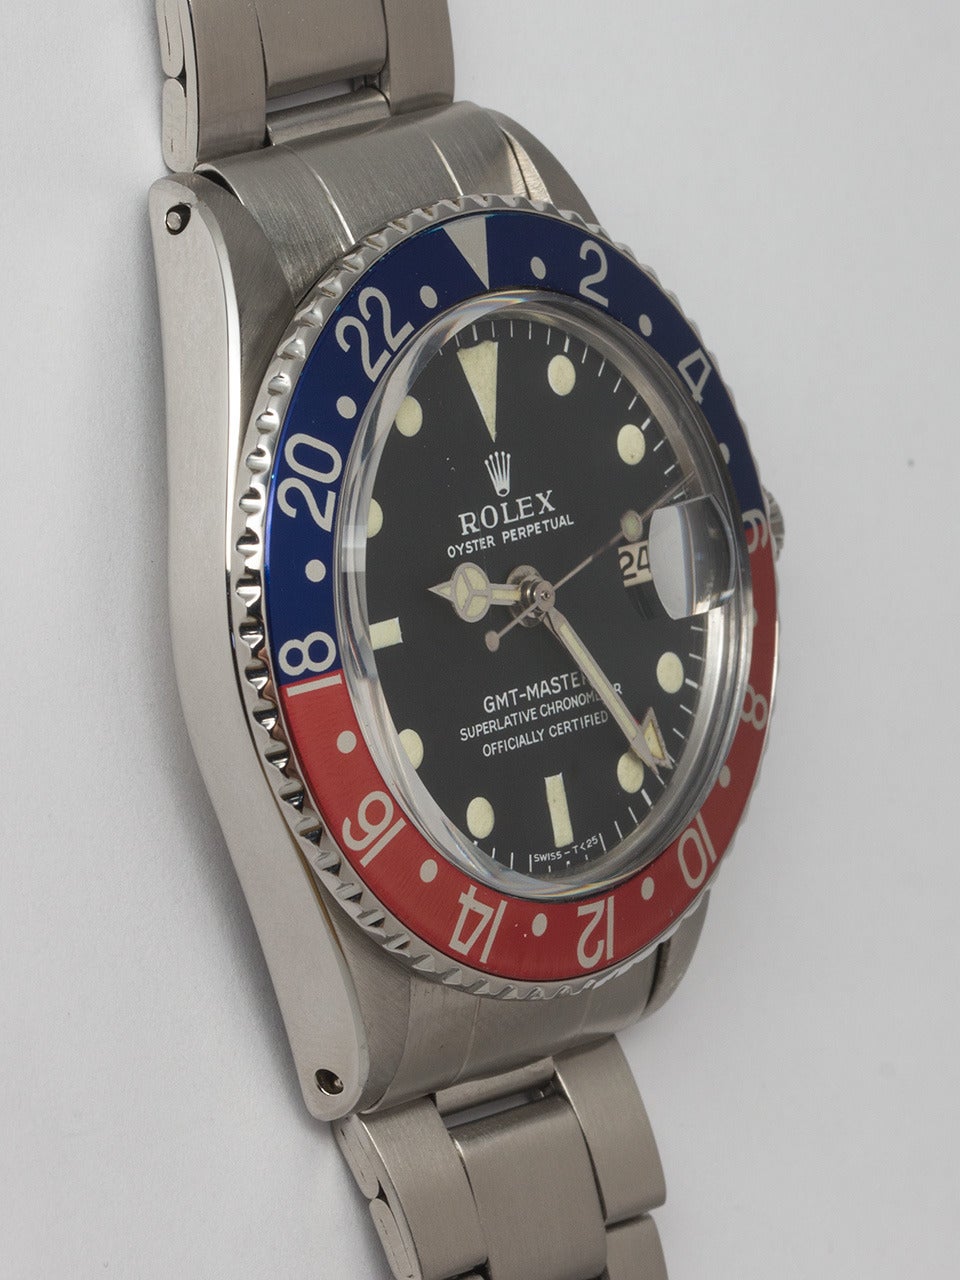 Rolex Stainless Steel GMT-Master Wristwatch ref 1675 serial #7.6 million circa 1982. 40mm diameter Oyster case featuring red and blue so called “Pepsi” bezel. Original matte black dial with ivory patina luminous indexes and matching hands. Powered